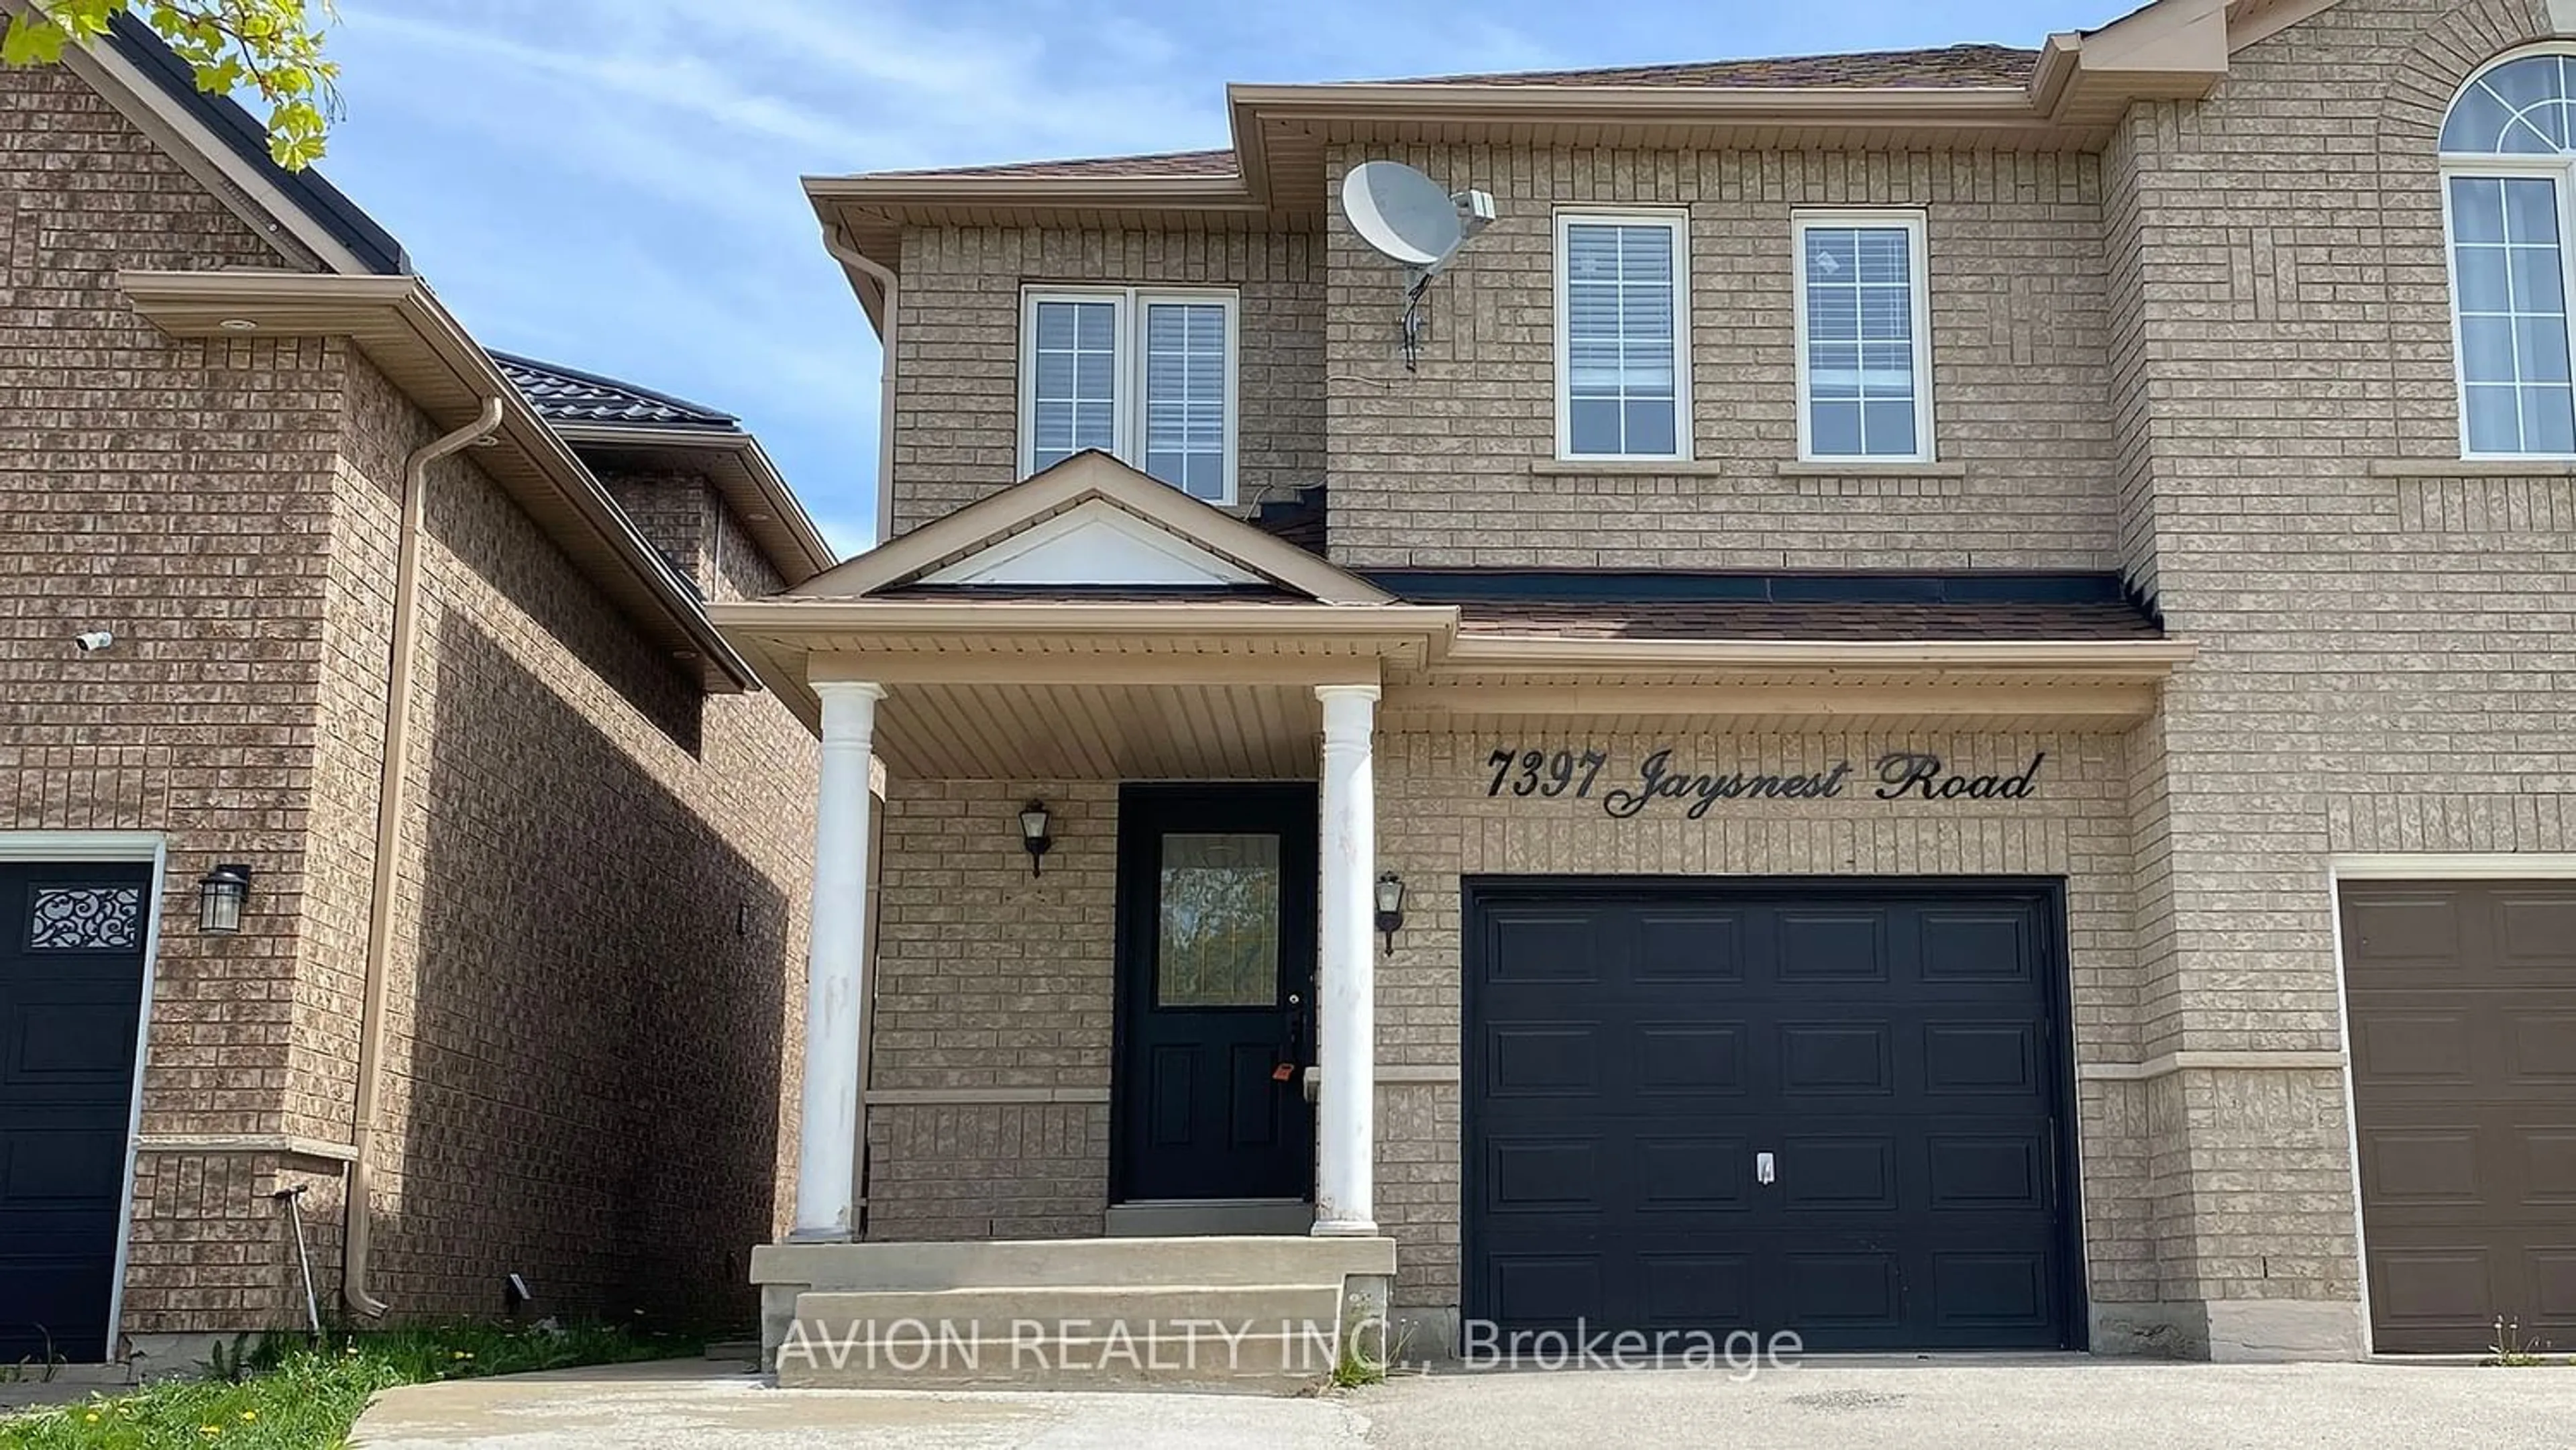 Home with brick exterior material for 7397 Jaysnest Rd, Mississauga Ontario L5N 8J3